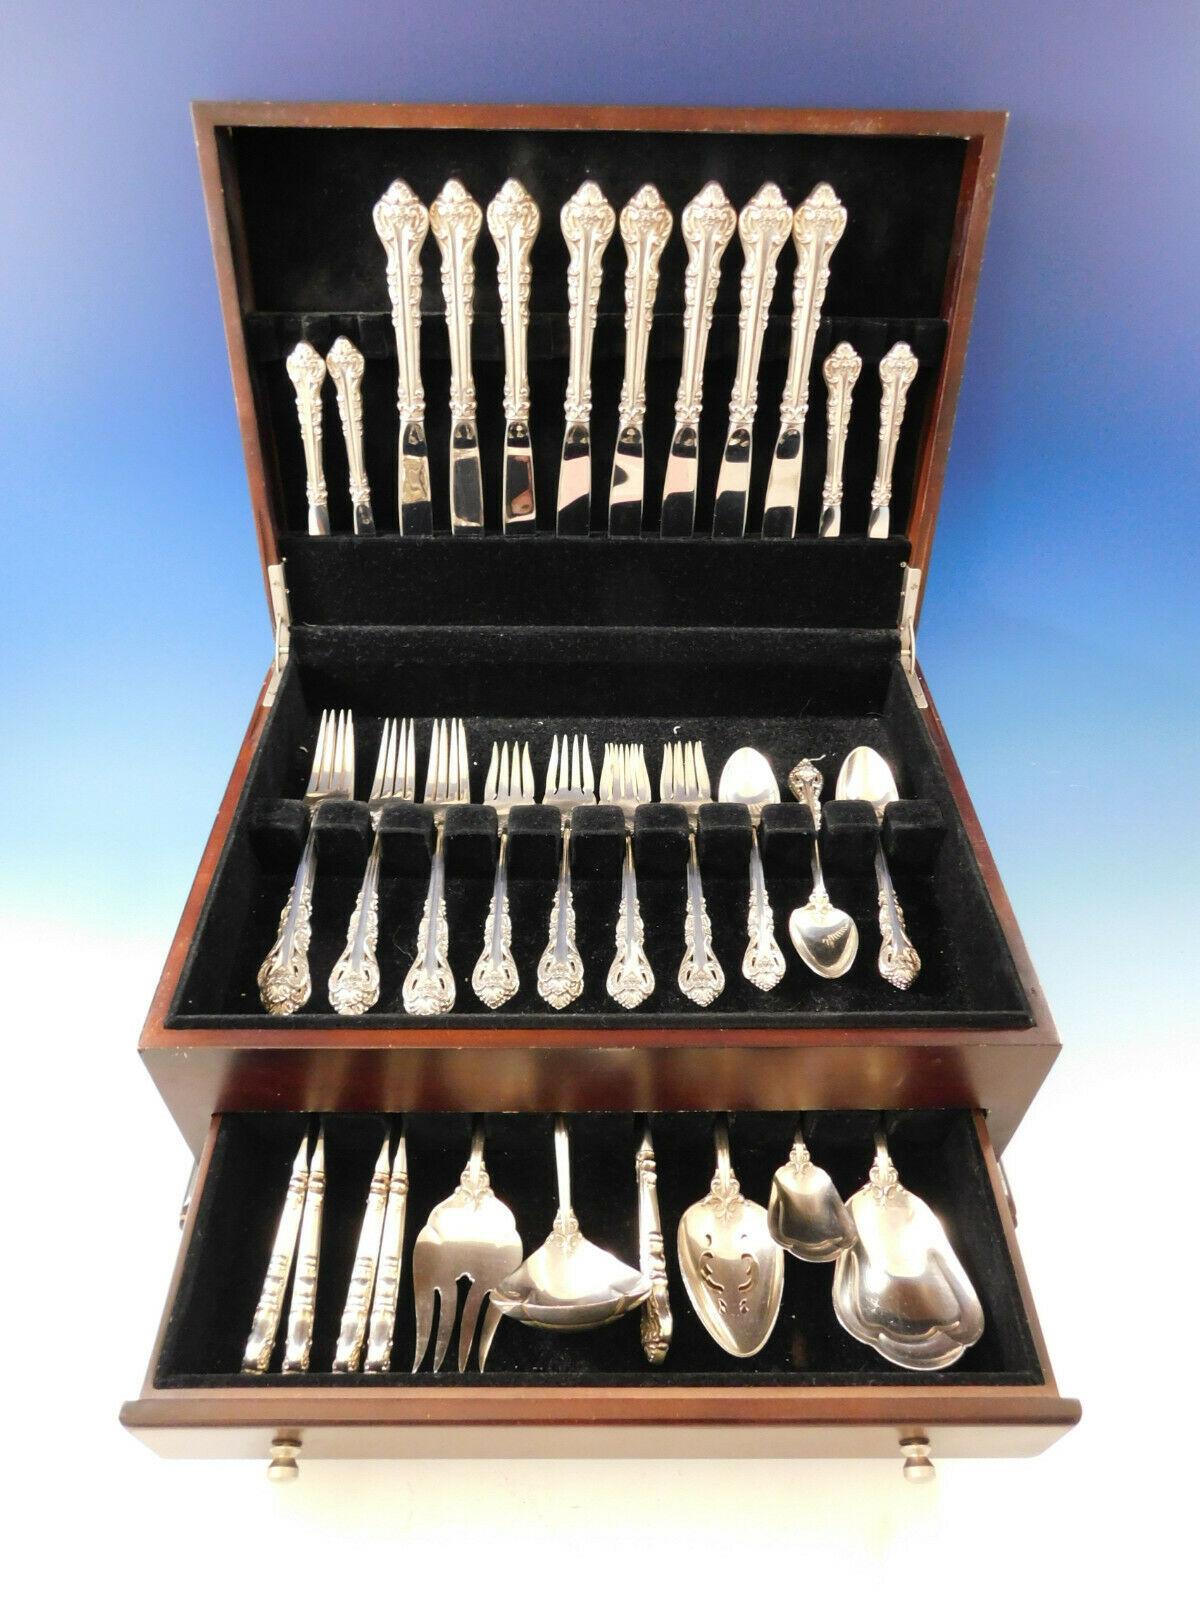 Silver Masterpiece by International (pierced handle) sterling silver flatware set, 47 pieces. This set includes:

8 knives, 9 1/4